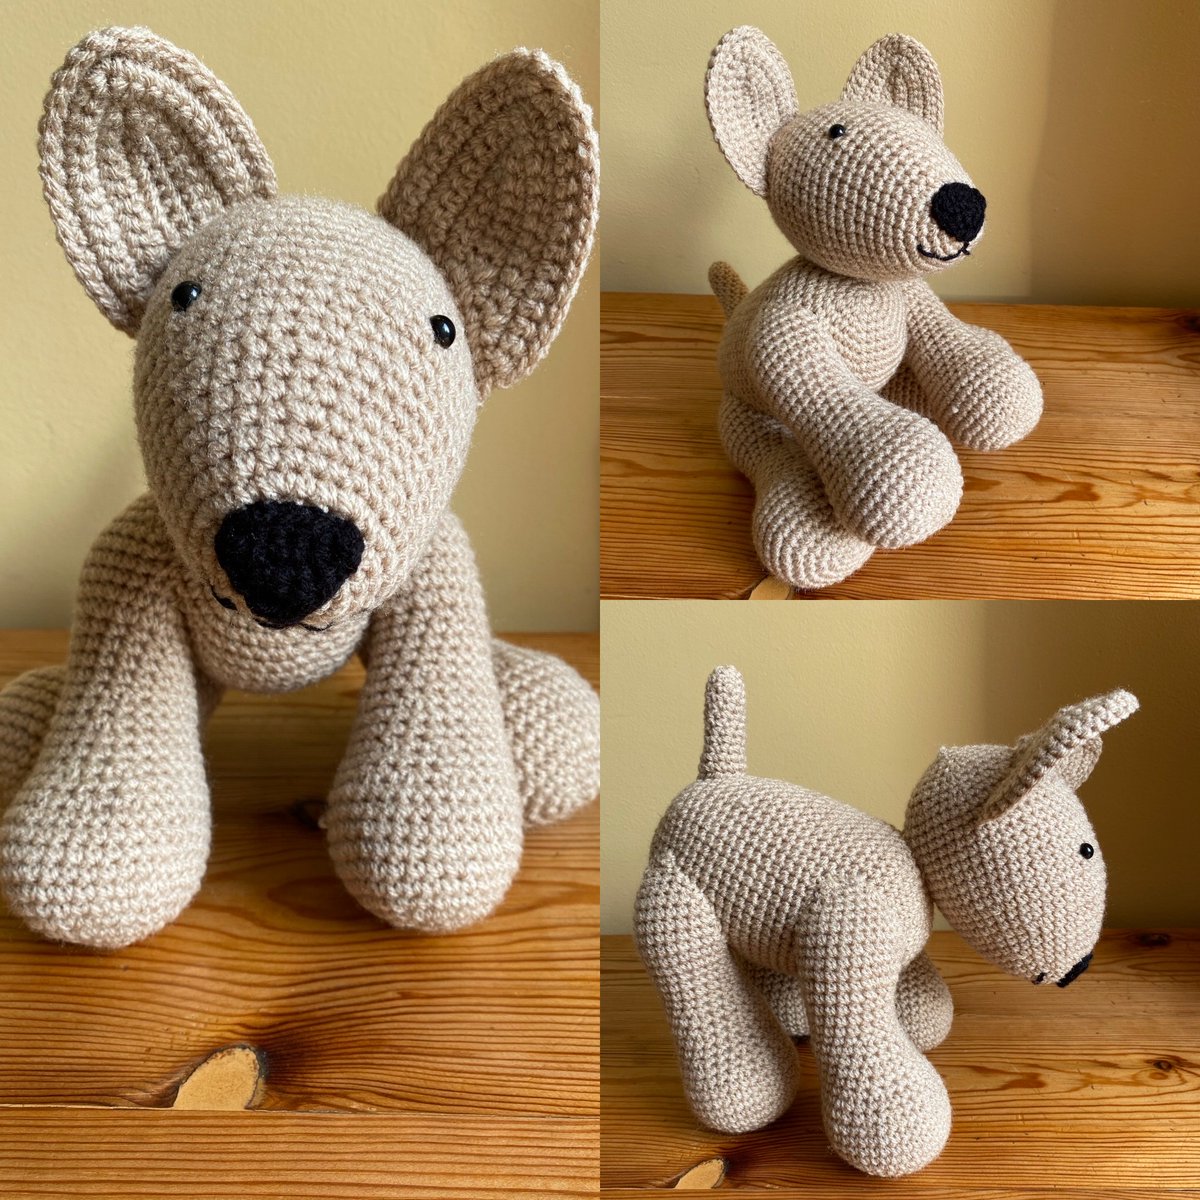 Get your own housetrained puppy!  No walking required 😊 #handmade #UKHashtags  #uksopro #giftideas  #MHHSBD  

bitzas.etsy.com/listing/477679…

Made to order in your own colour scheme 🐶 #dog The perfect pet for rainy days 😂